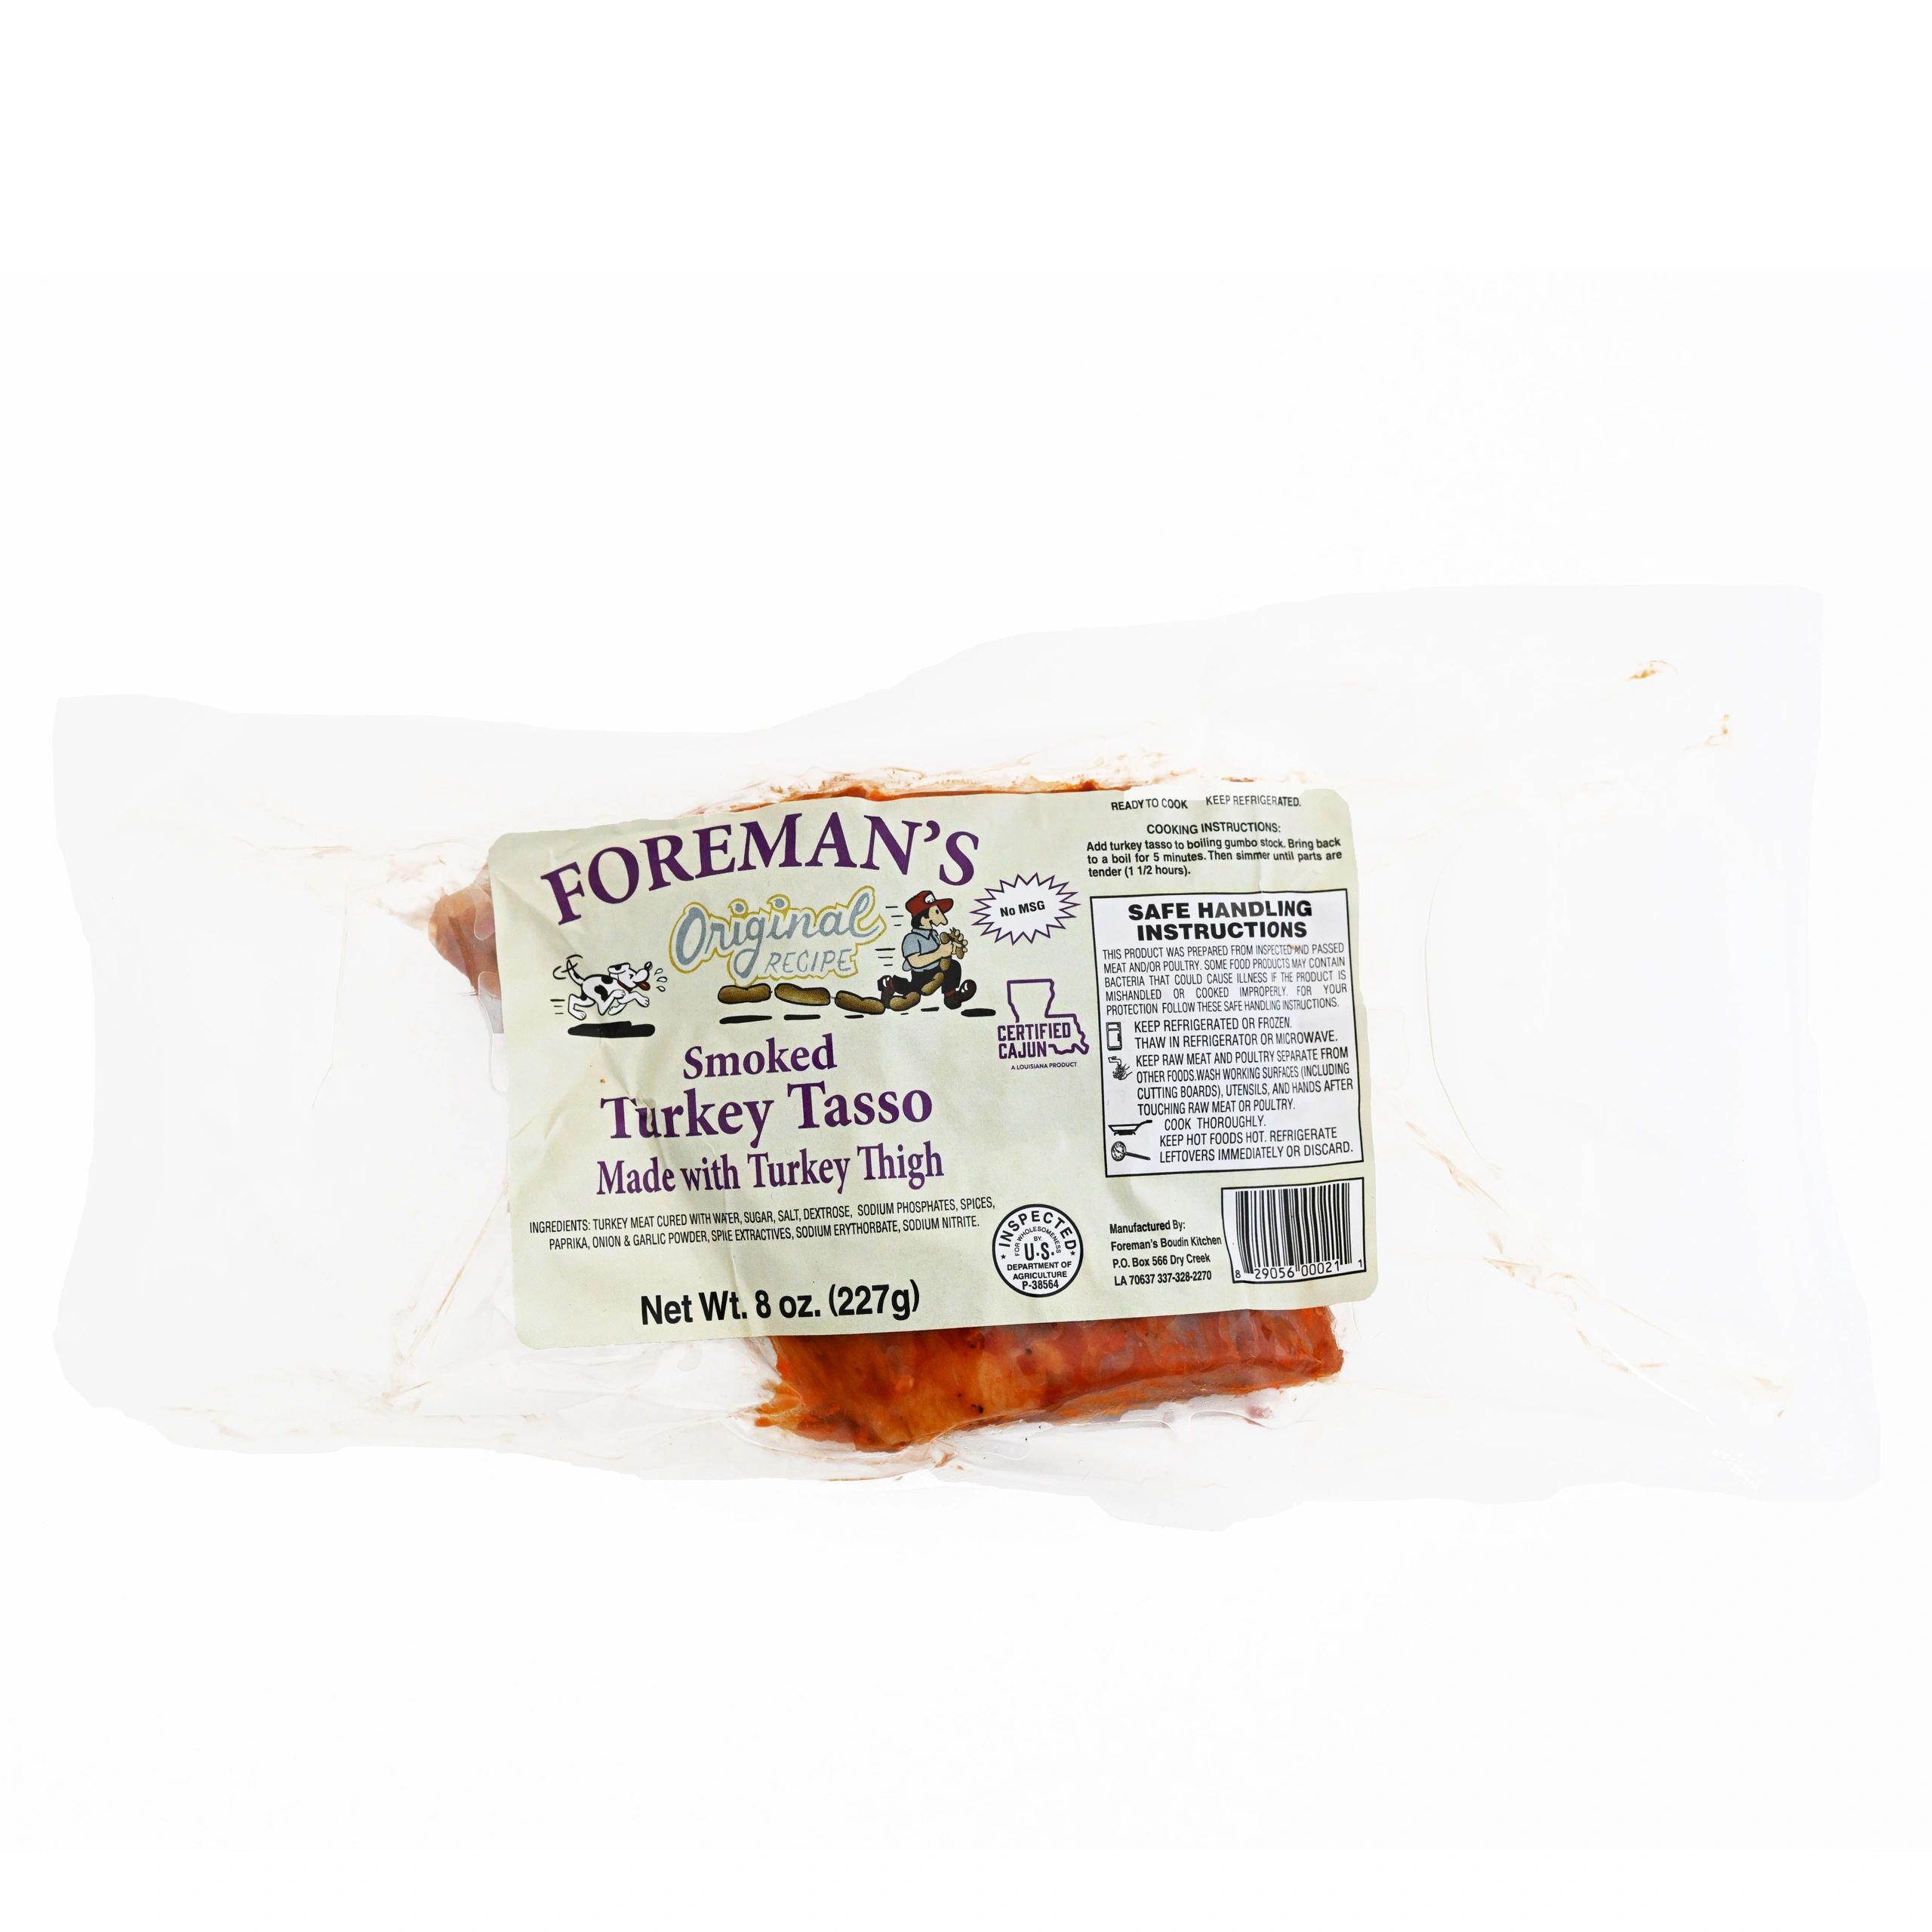 8oz pack Foremans Smoked Turkey Tasso Made with Turkey Thigh in a clear package with a cream label.
